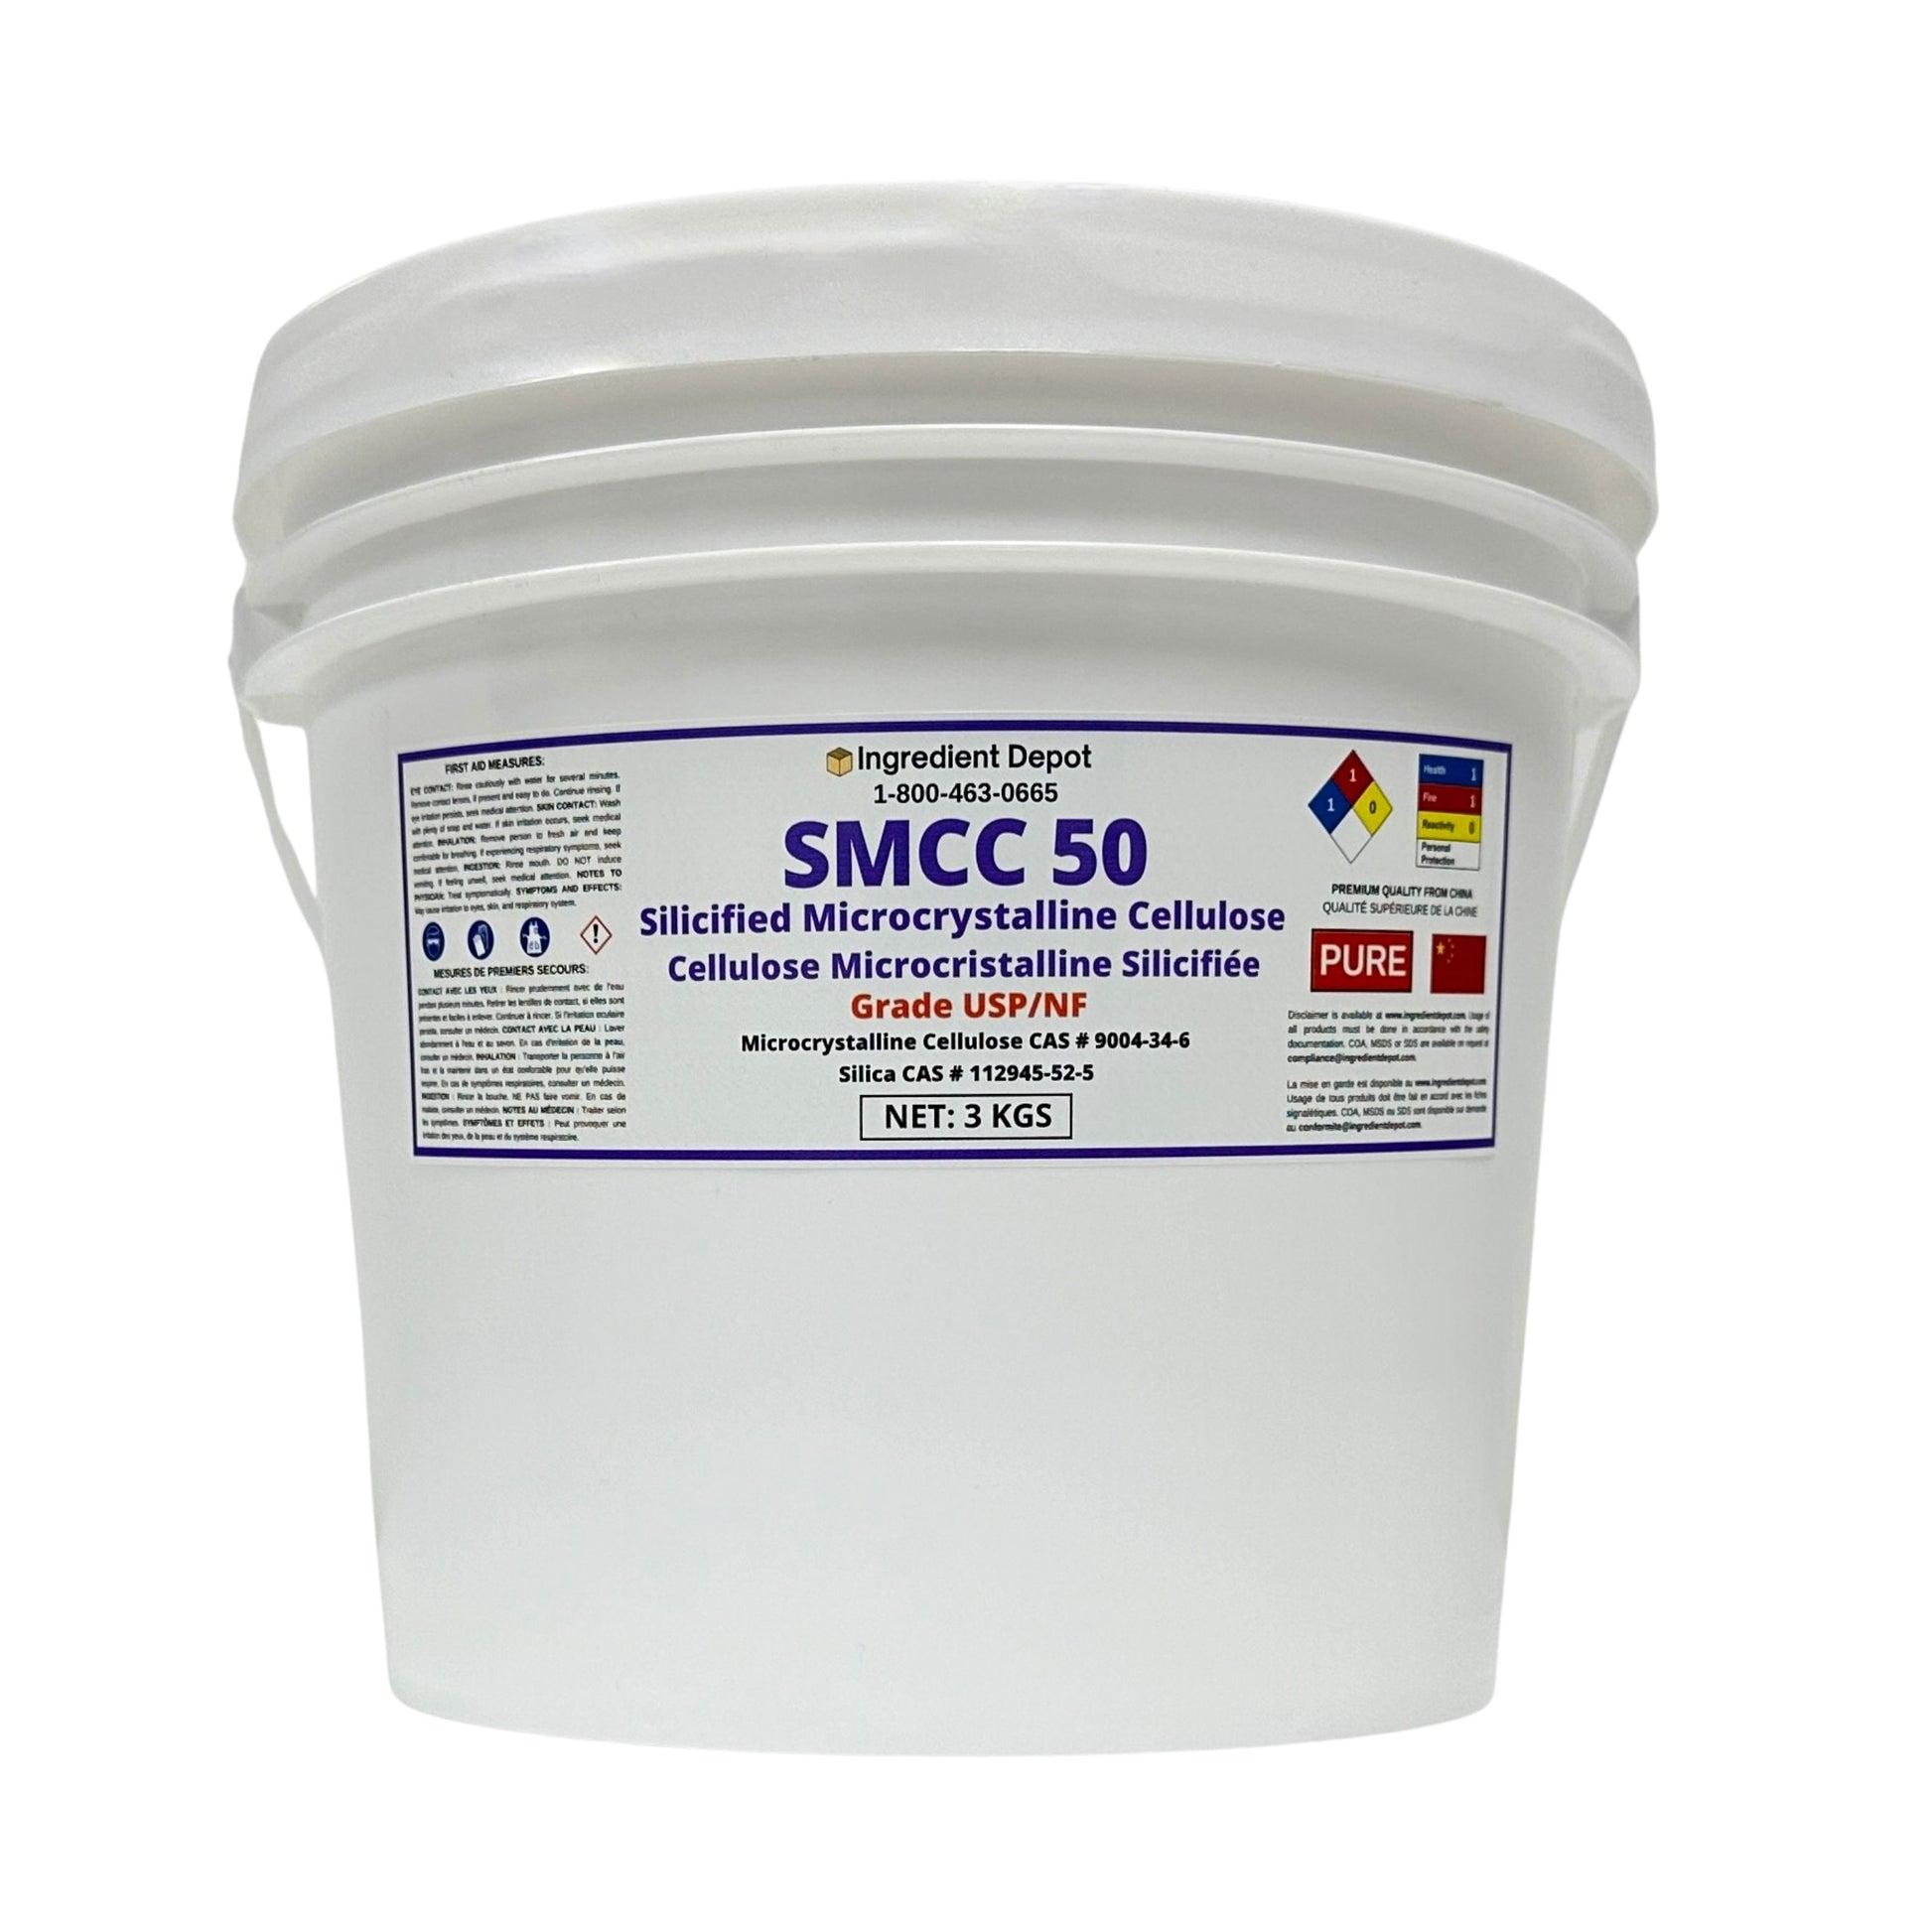 SMCC 50 Silicified Microcrystalline Cellulose - USP/NF Grade 3 kgs - Ingredient Depot